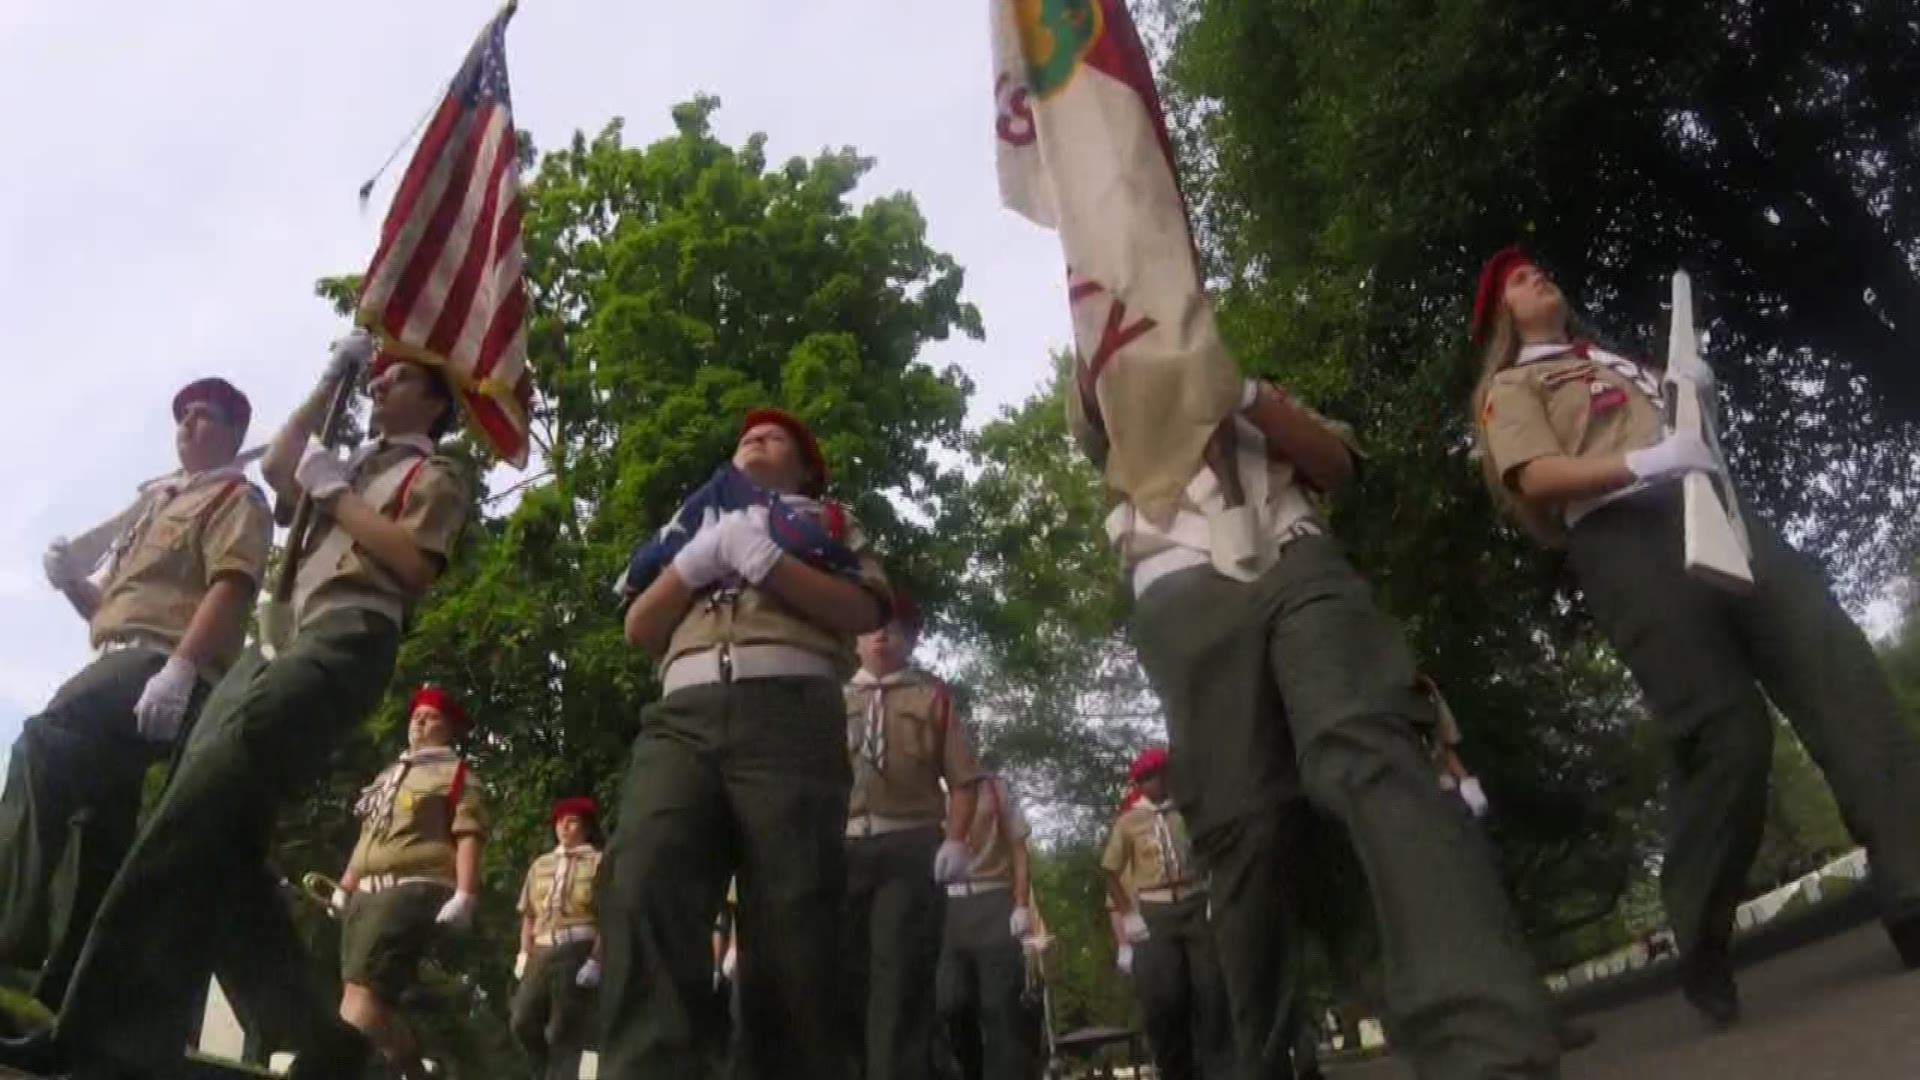 This morning, a group of about 250 Boy Scouts met at Zachary Taylor Cemetery to place flags on gravestones.